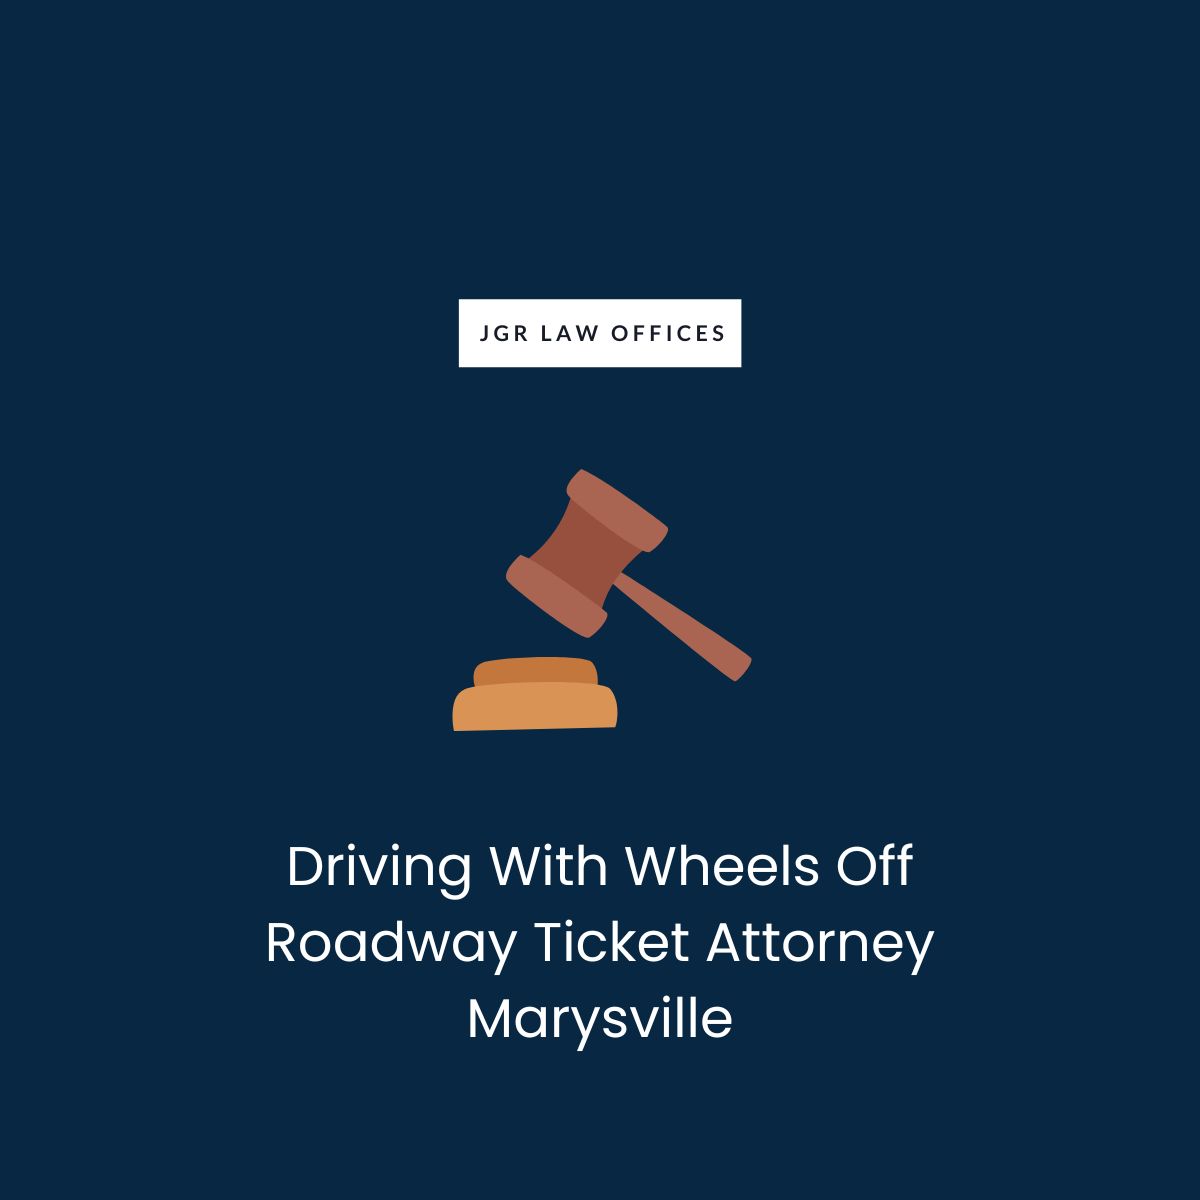 Driving With Wheels Off Roadway Ticket Attorney Marysville